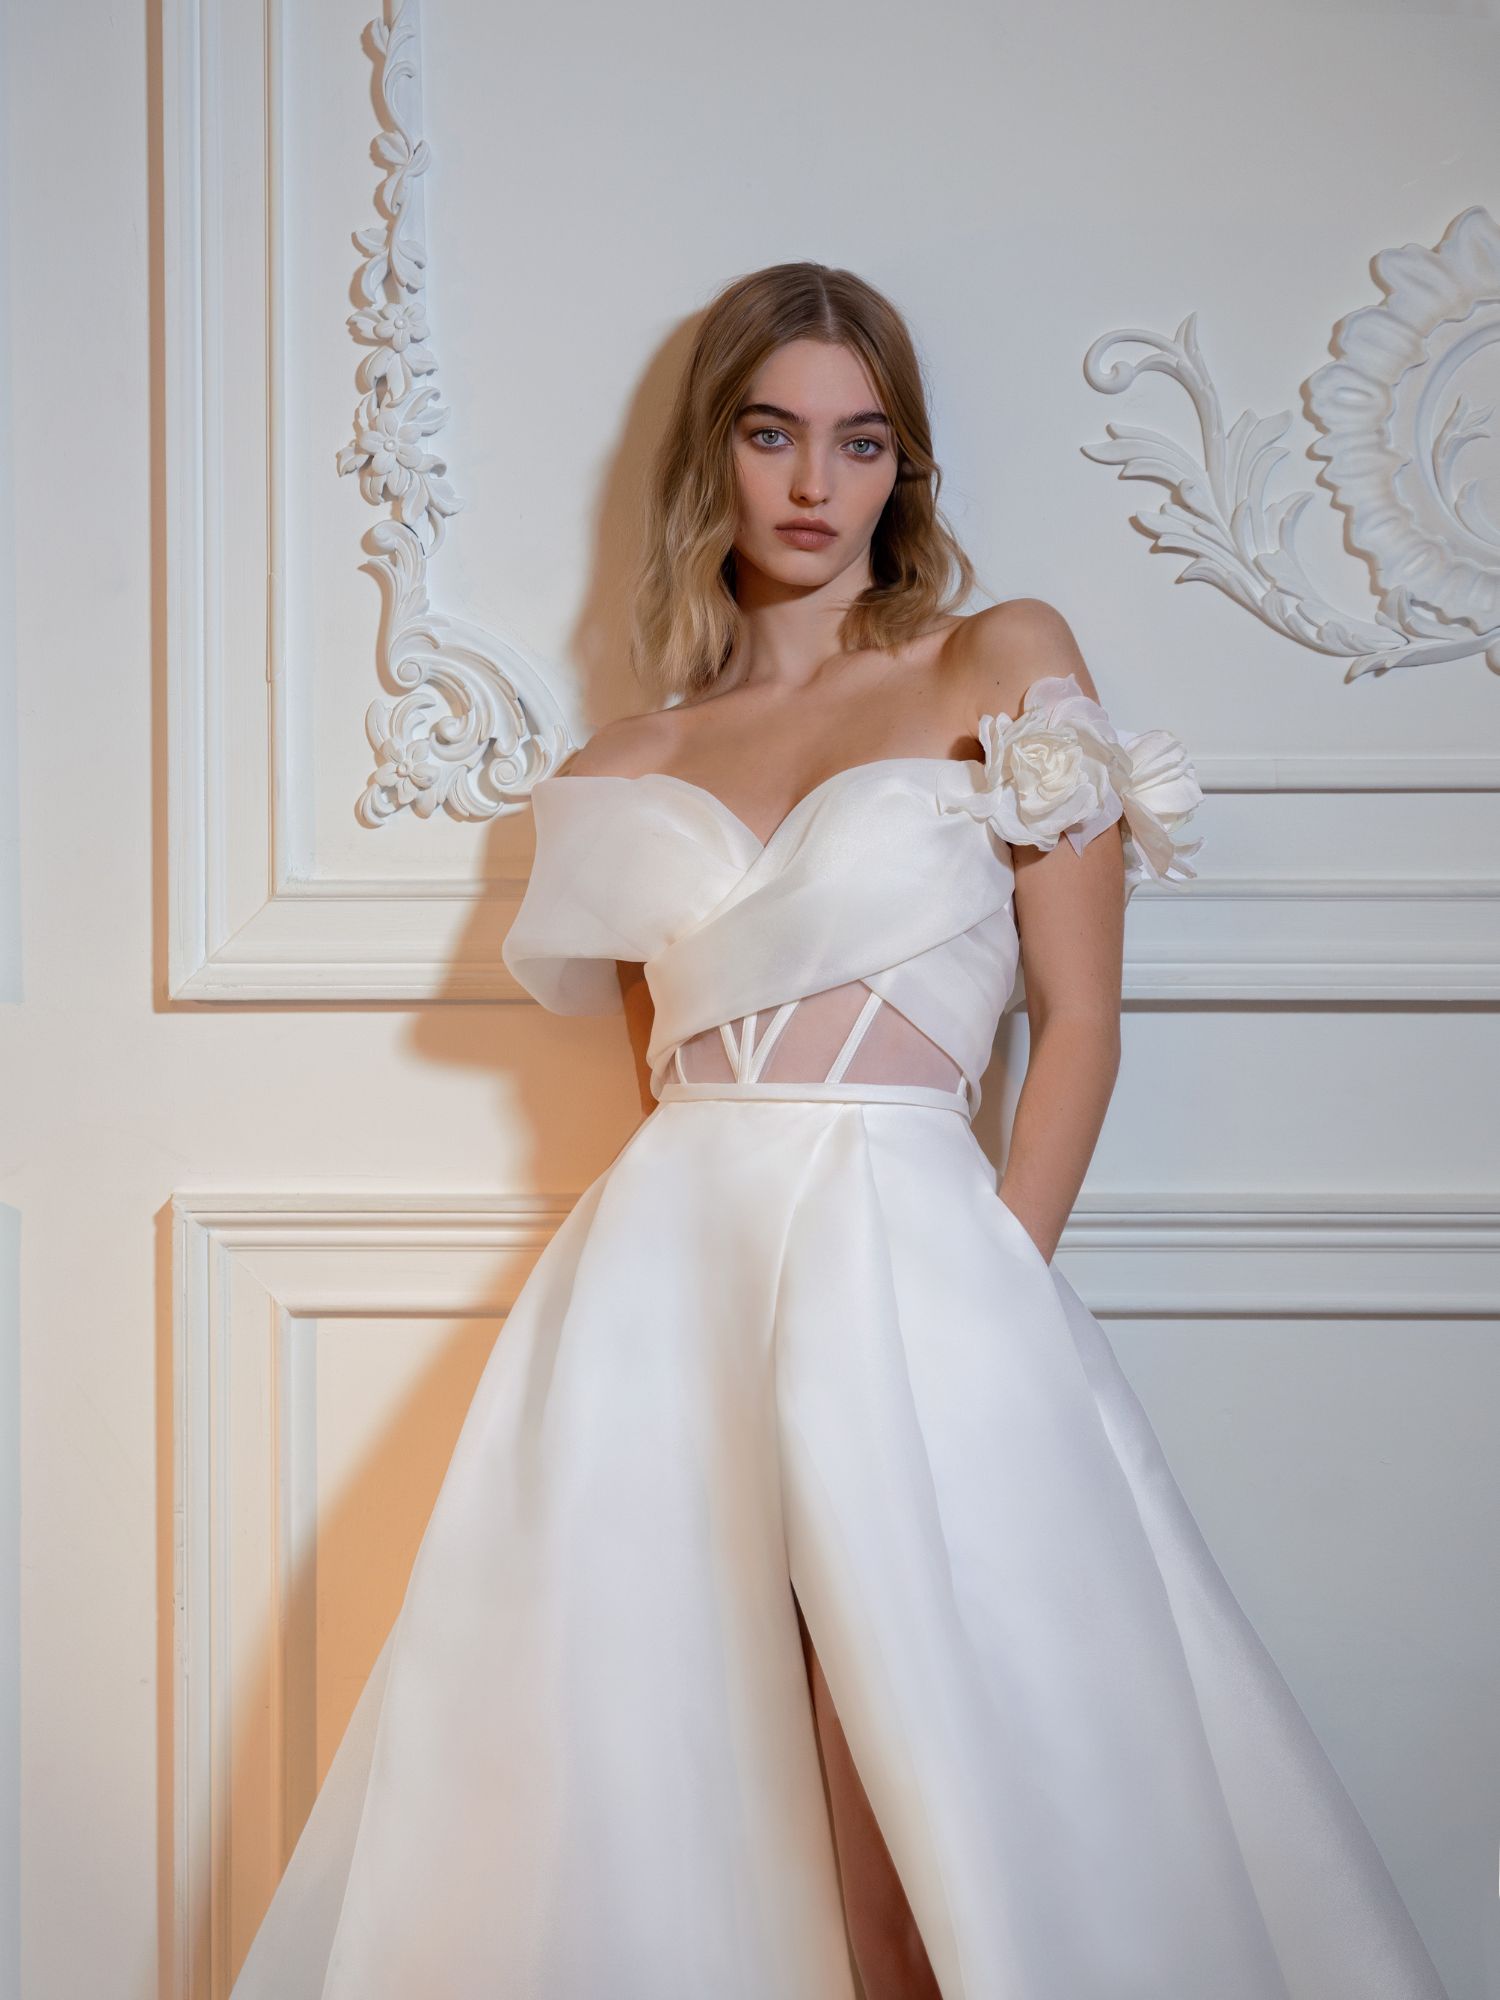 Considering Shapewear Under Your Wedding Dress? Here's What to Know